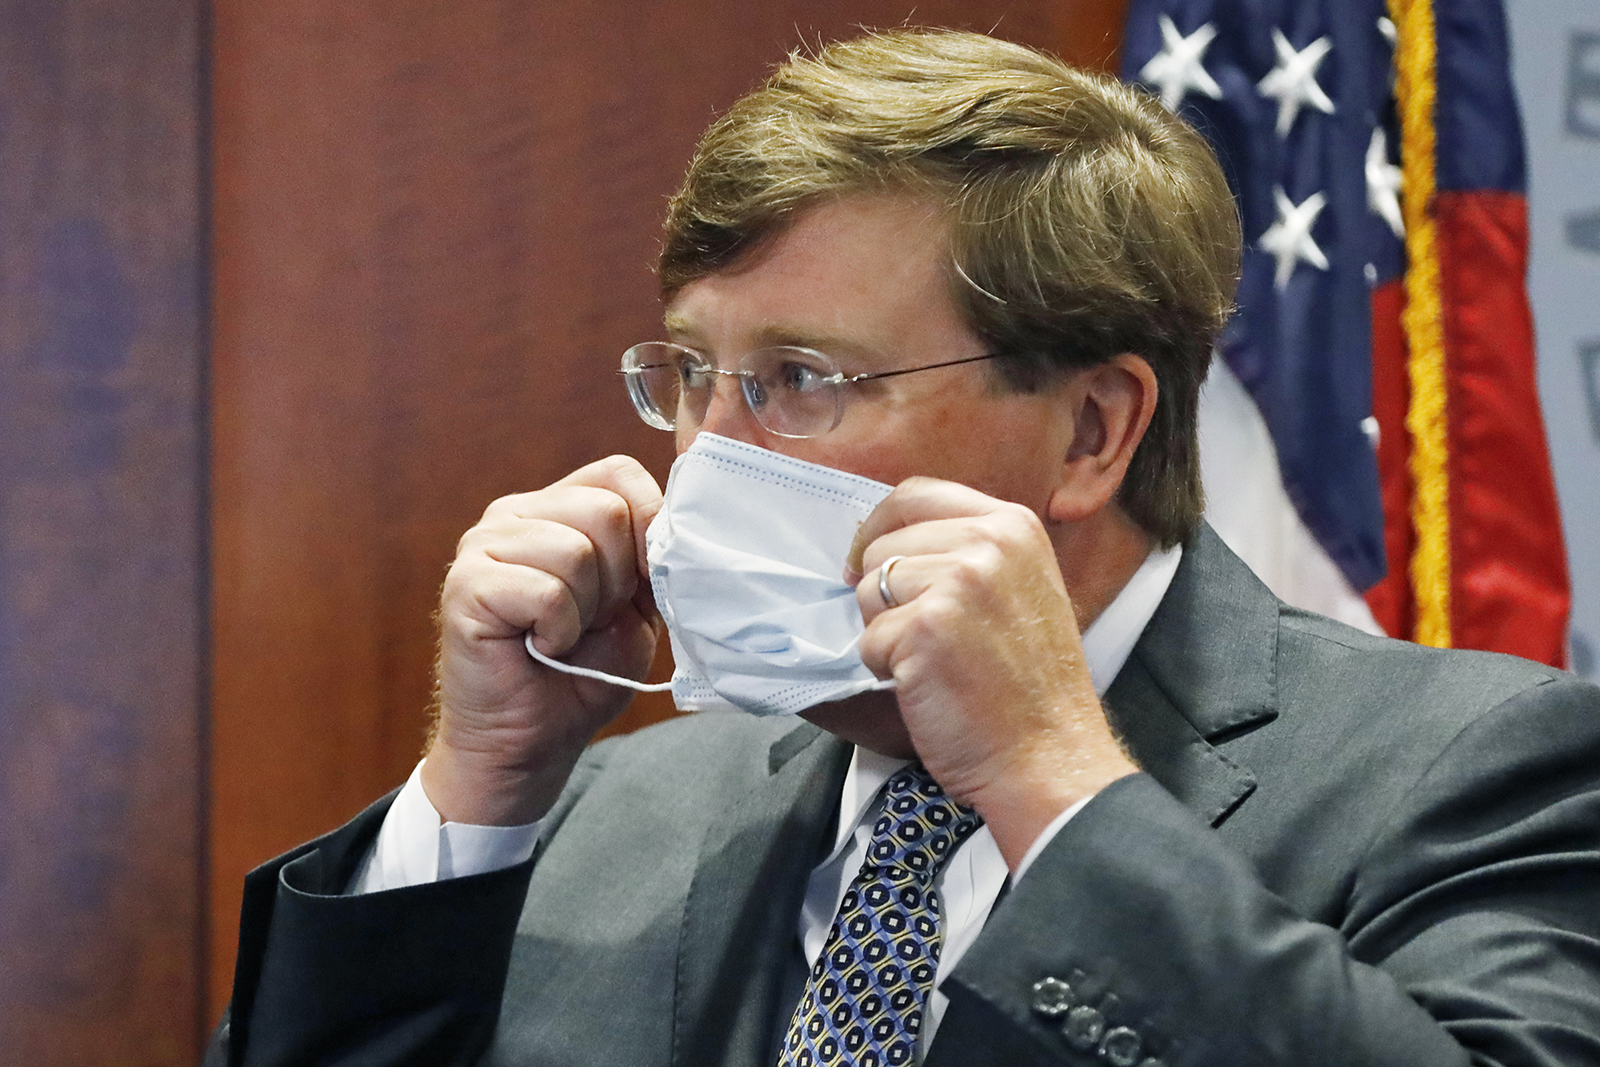 Gov. Tate Reeves adjusts his face mask as he prepares to leave his Covid-19 press briefing on Wednesday, August 5, in Jackson, Mississippi.